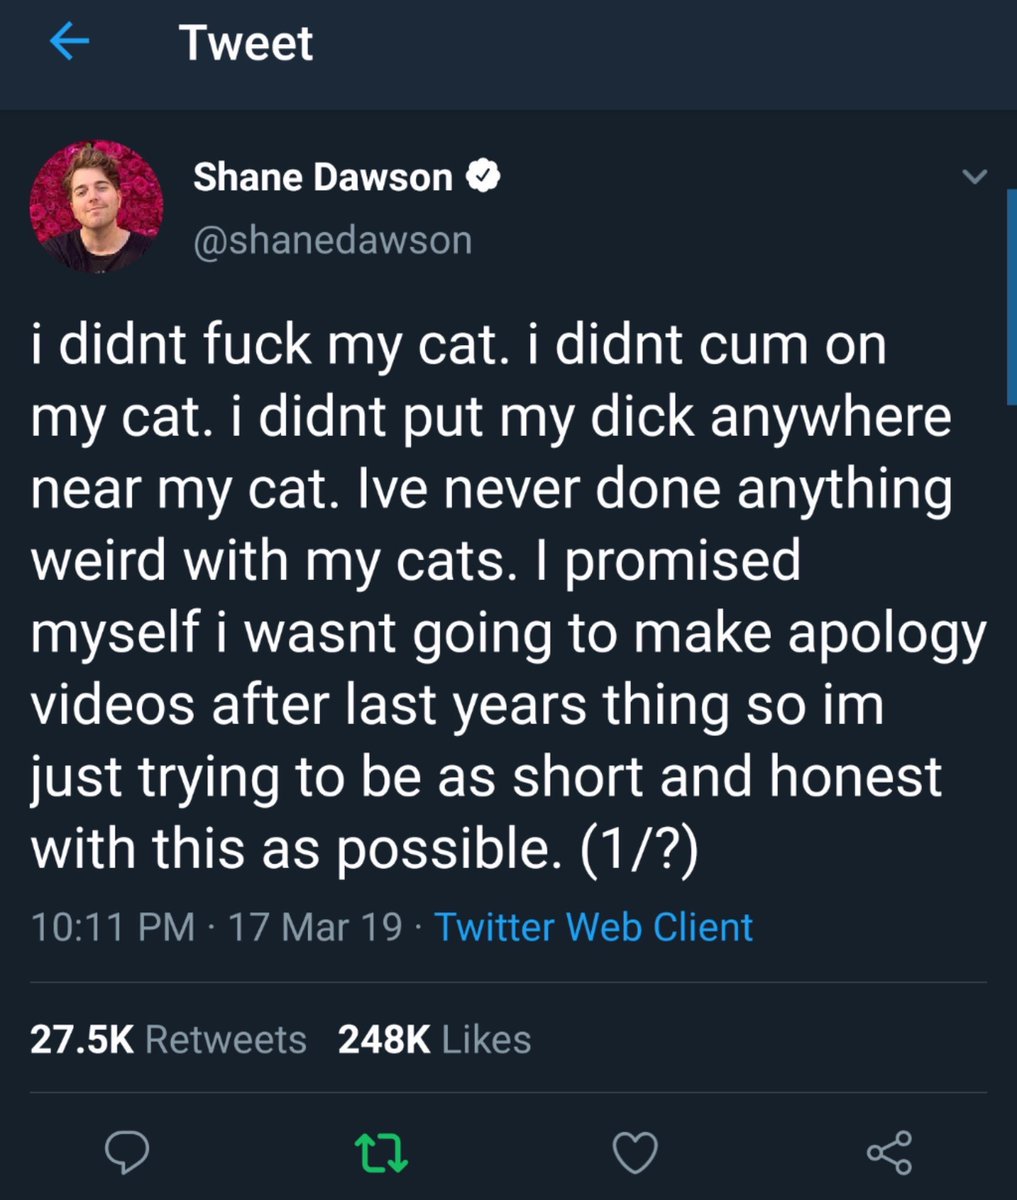 worst tweets of all time - screenshot - Tweet Shane Dawson i didnt fuck my cat. i didnt cum on my cat. i didnt put my dick anywhere near my cat. Ive never done anything weird with my cats. I promised myself i wasnt going to make apology videos after last 